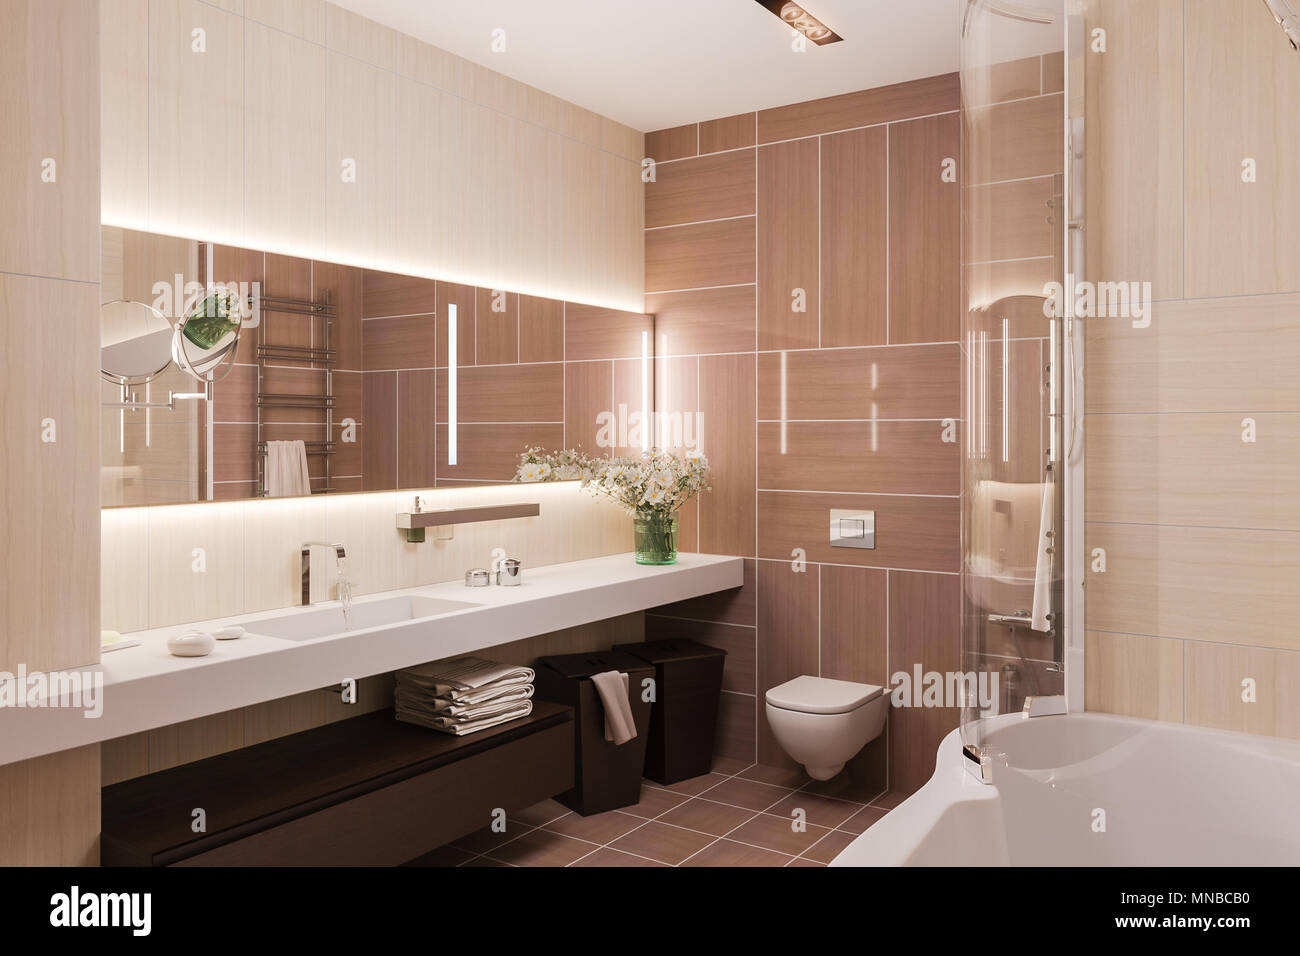 Interior design of a modern bathroom with a large mirror. 3d illustration in warm colors. 3d render in high resolution for printing. Stock Photo